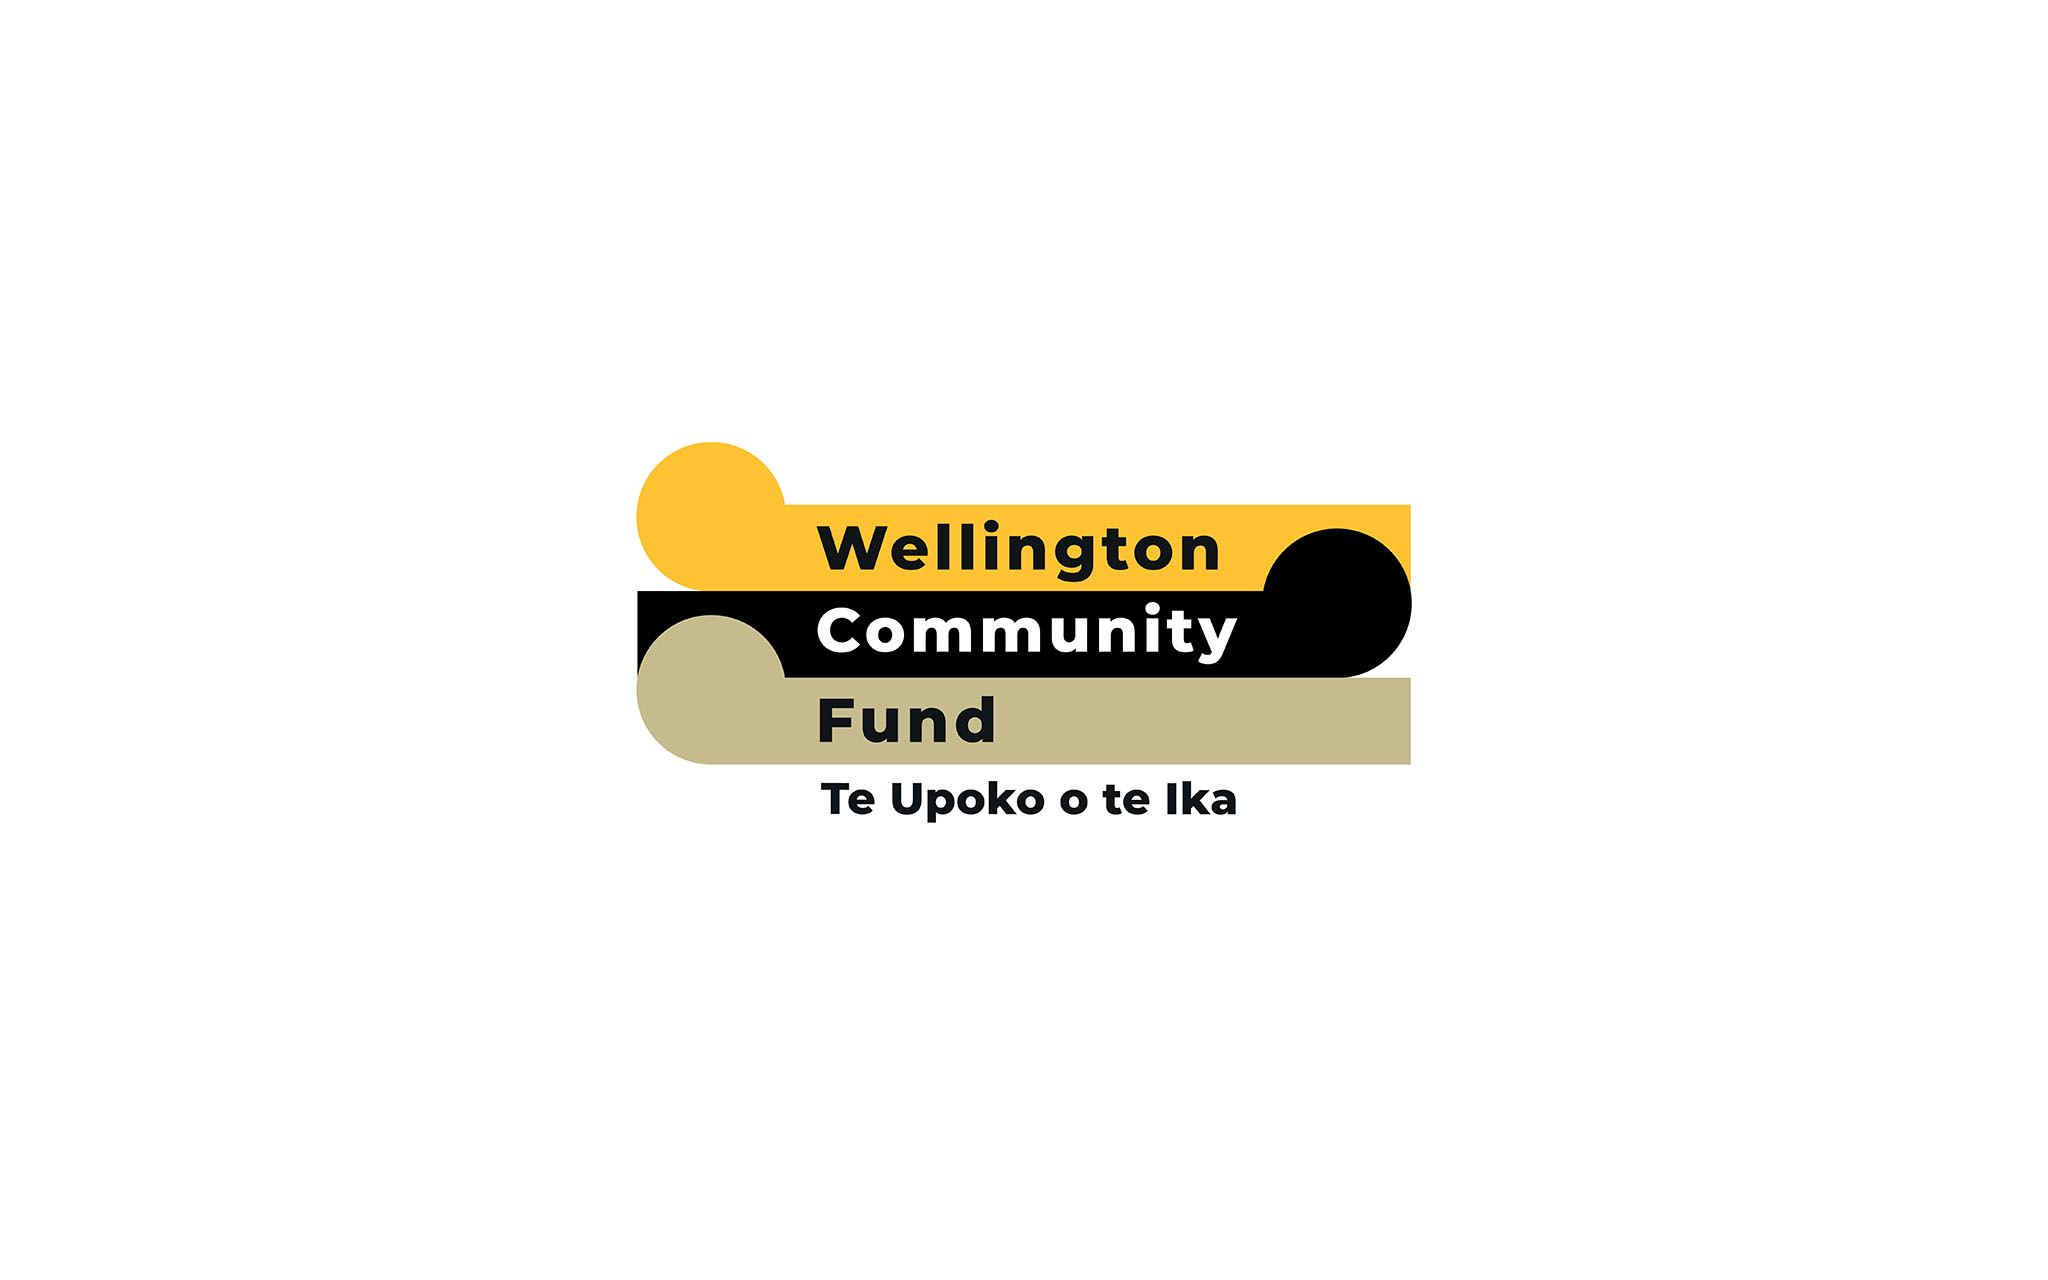 Rebrand was commissioned to undertake brand research with community and iwi partners for the Wellington Community Trust.